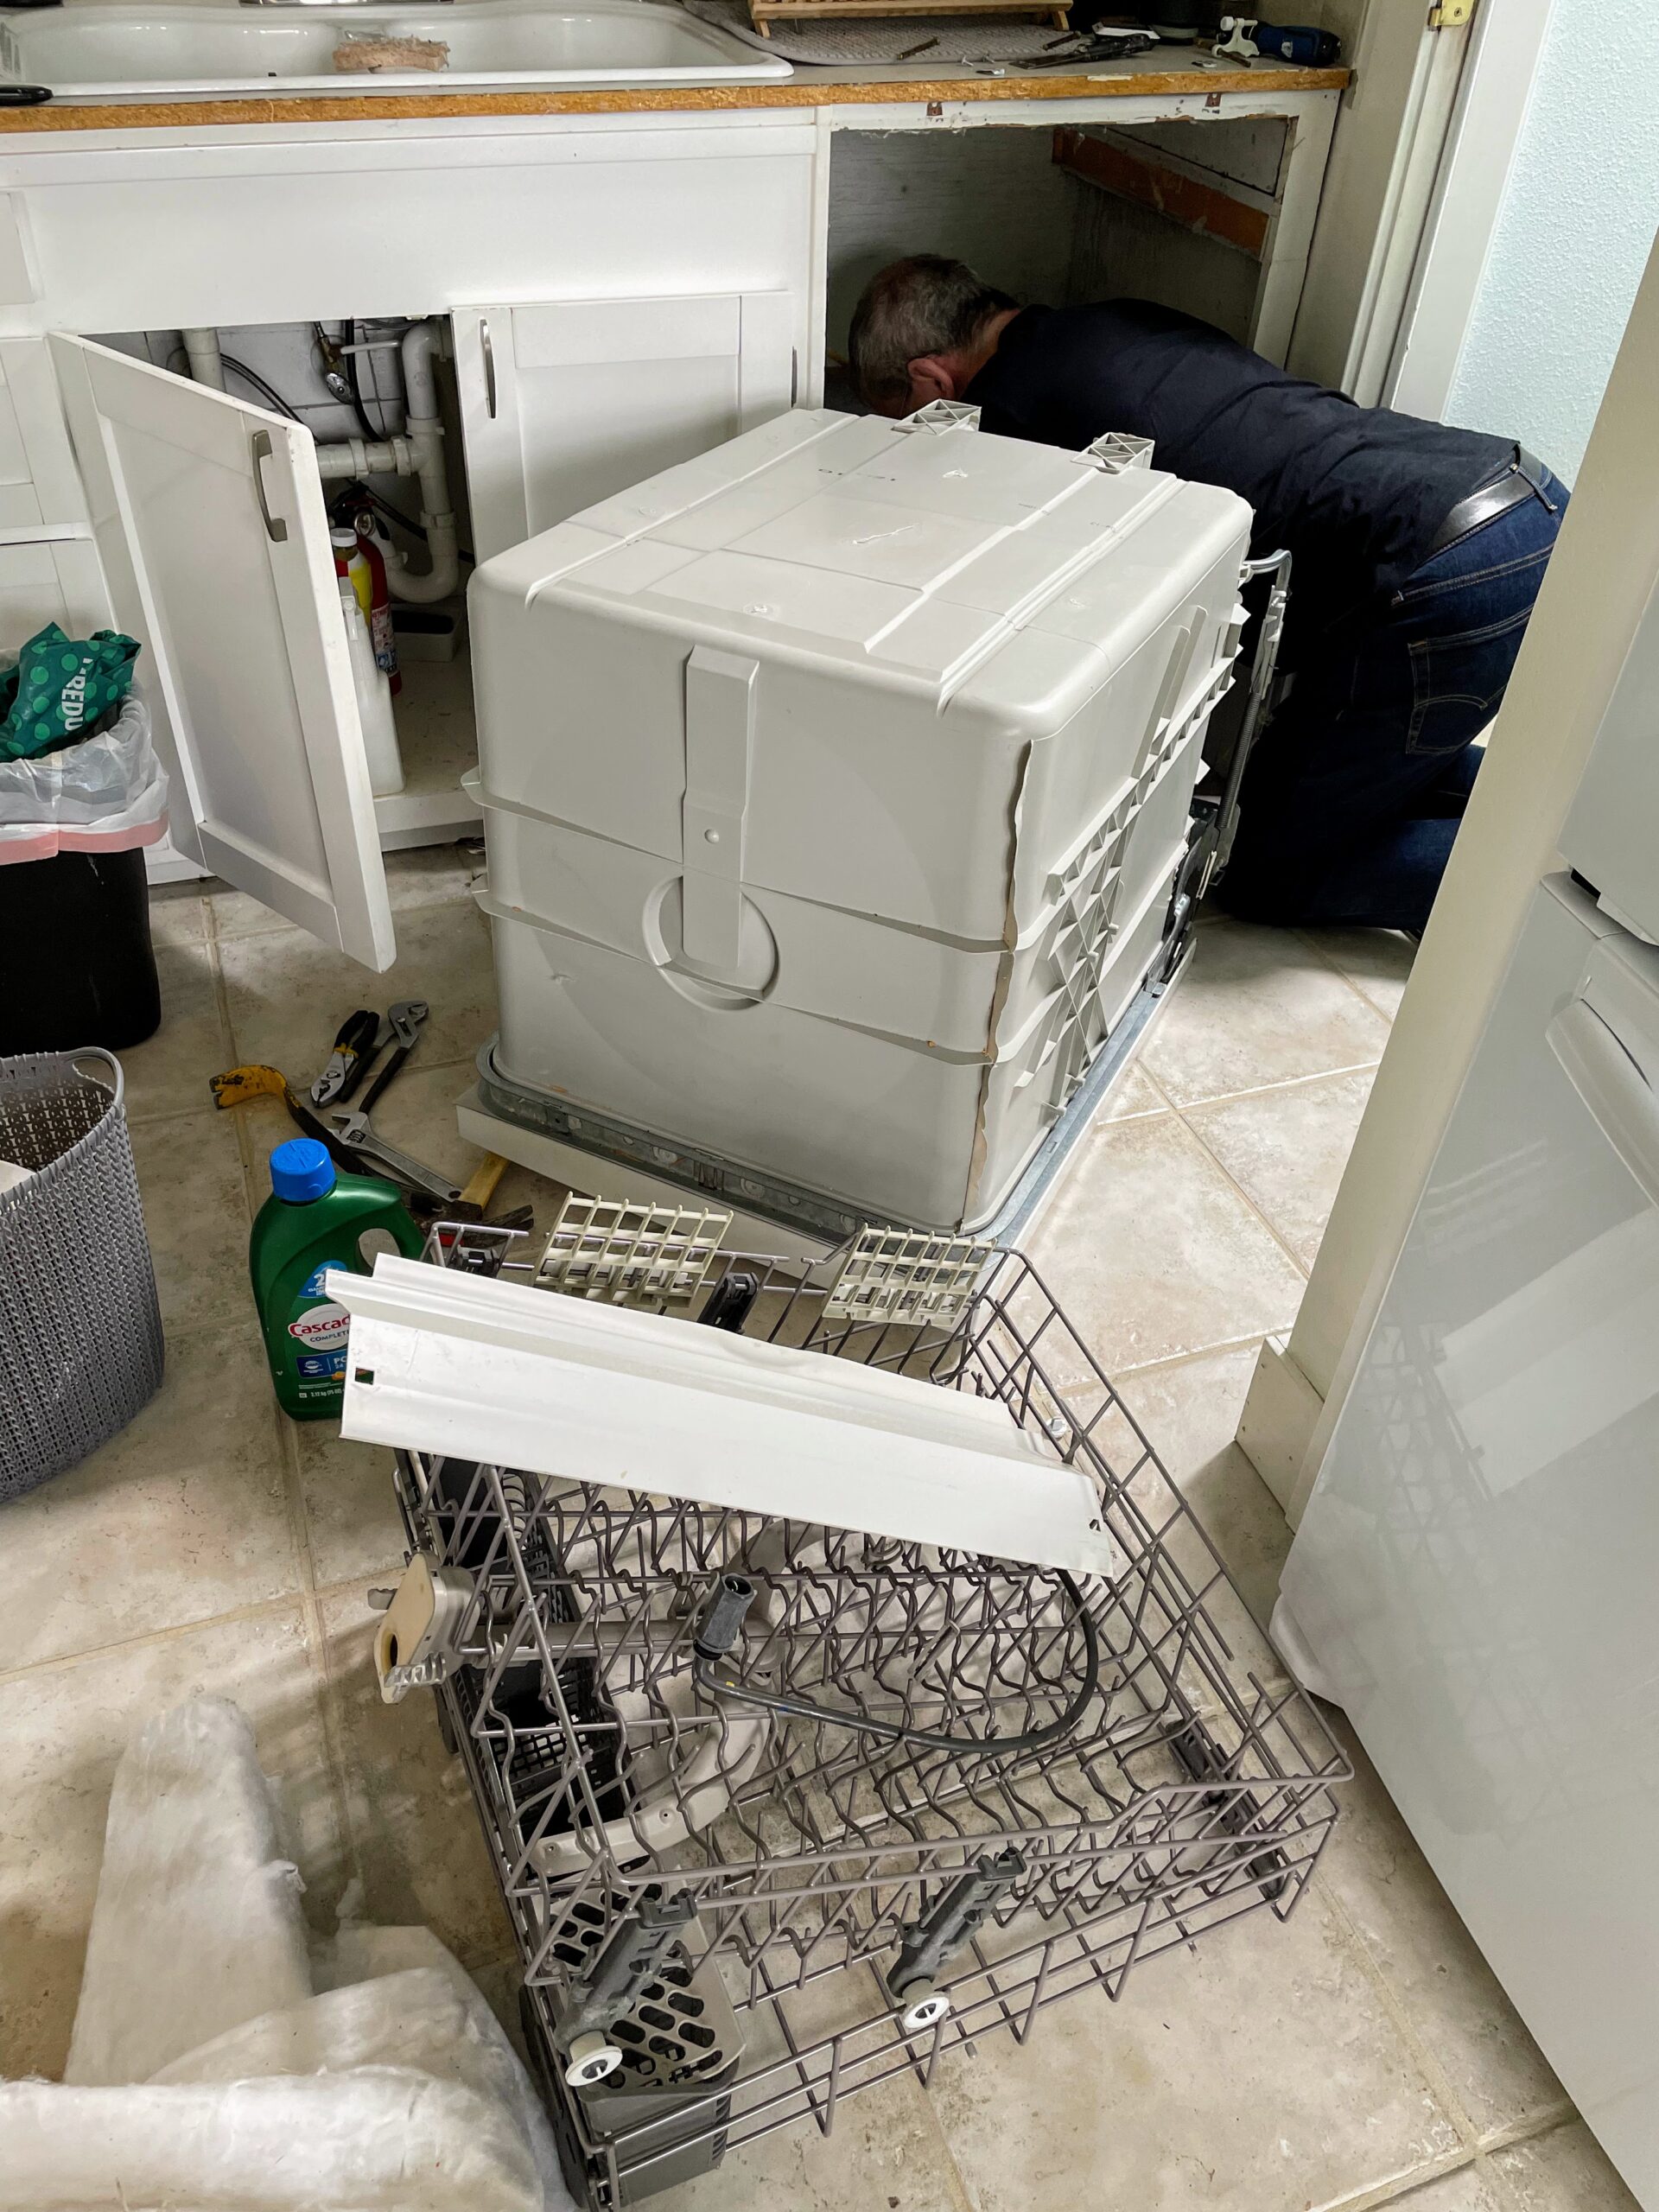 Dishwasher on kitchen floor and man peering into hole under counter where dishwasher used to be